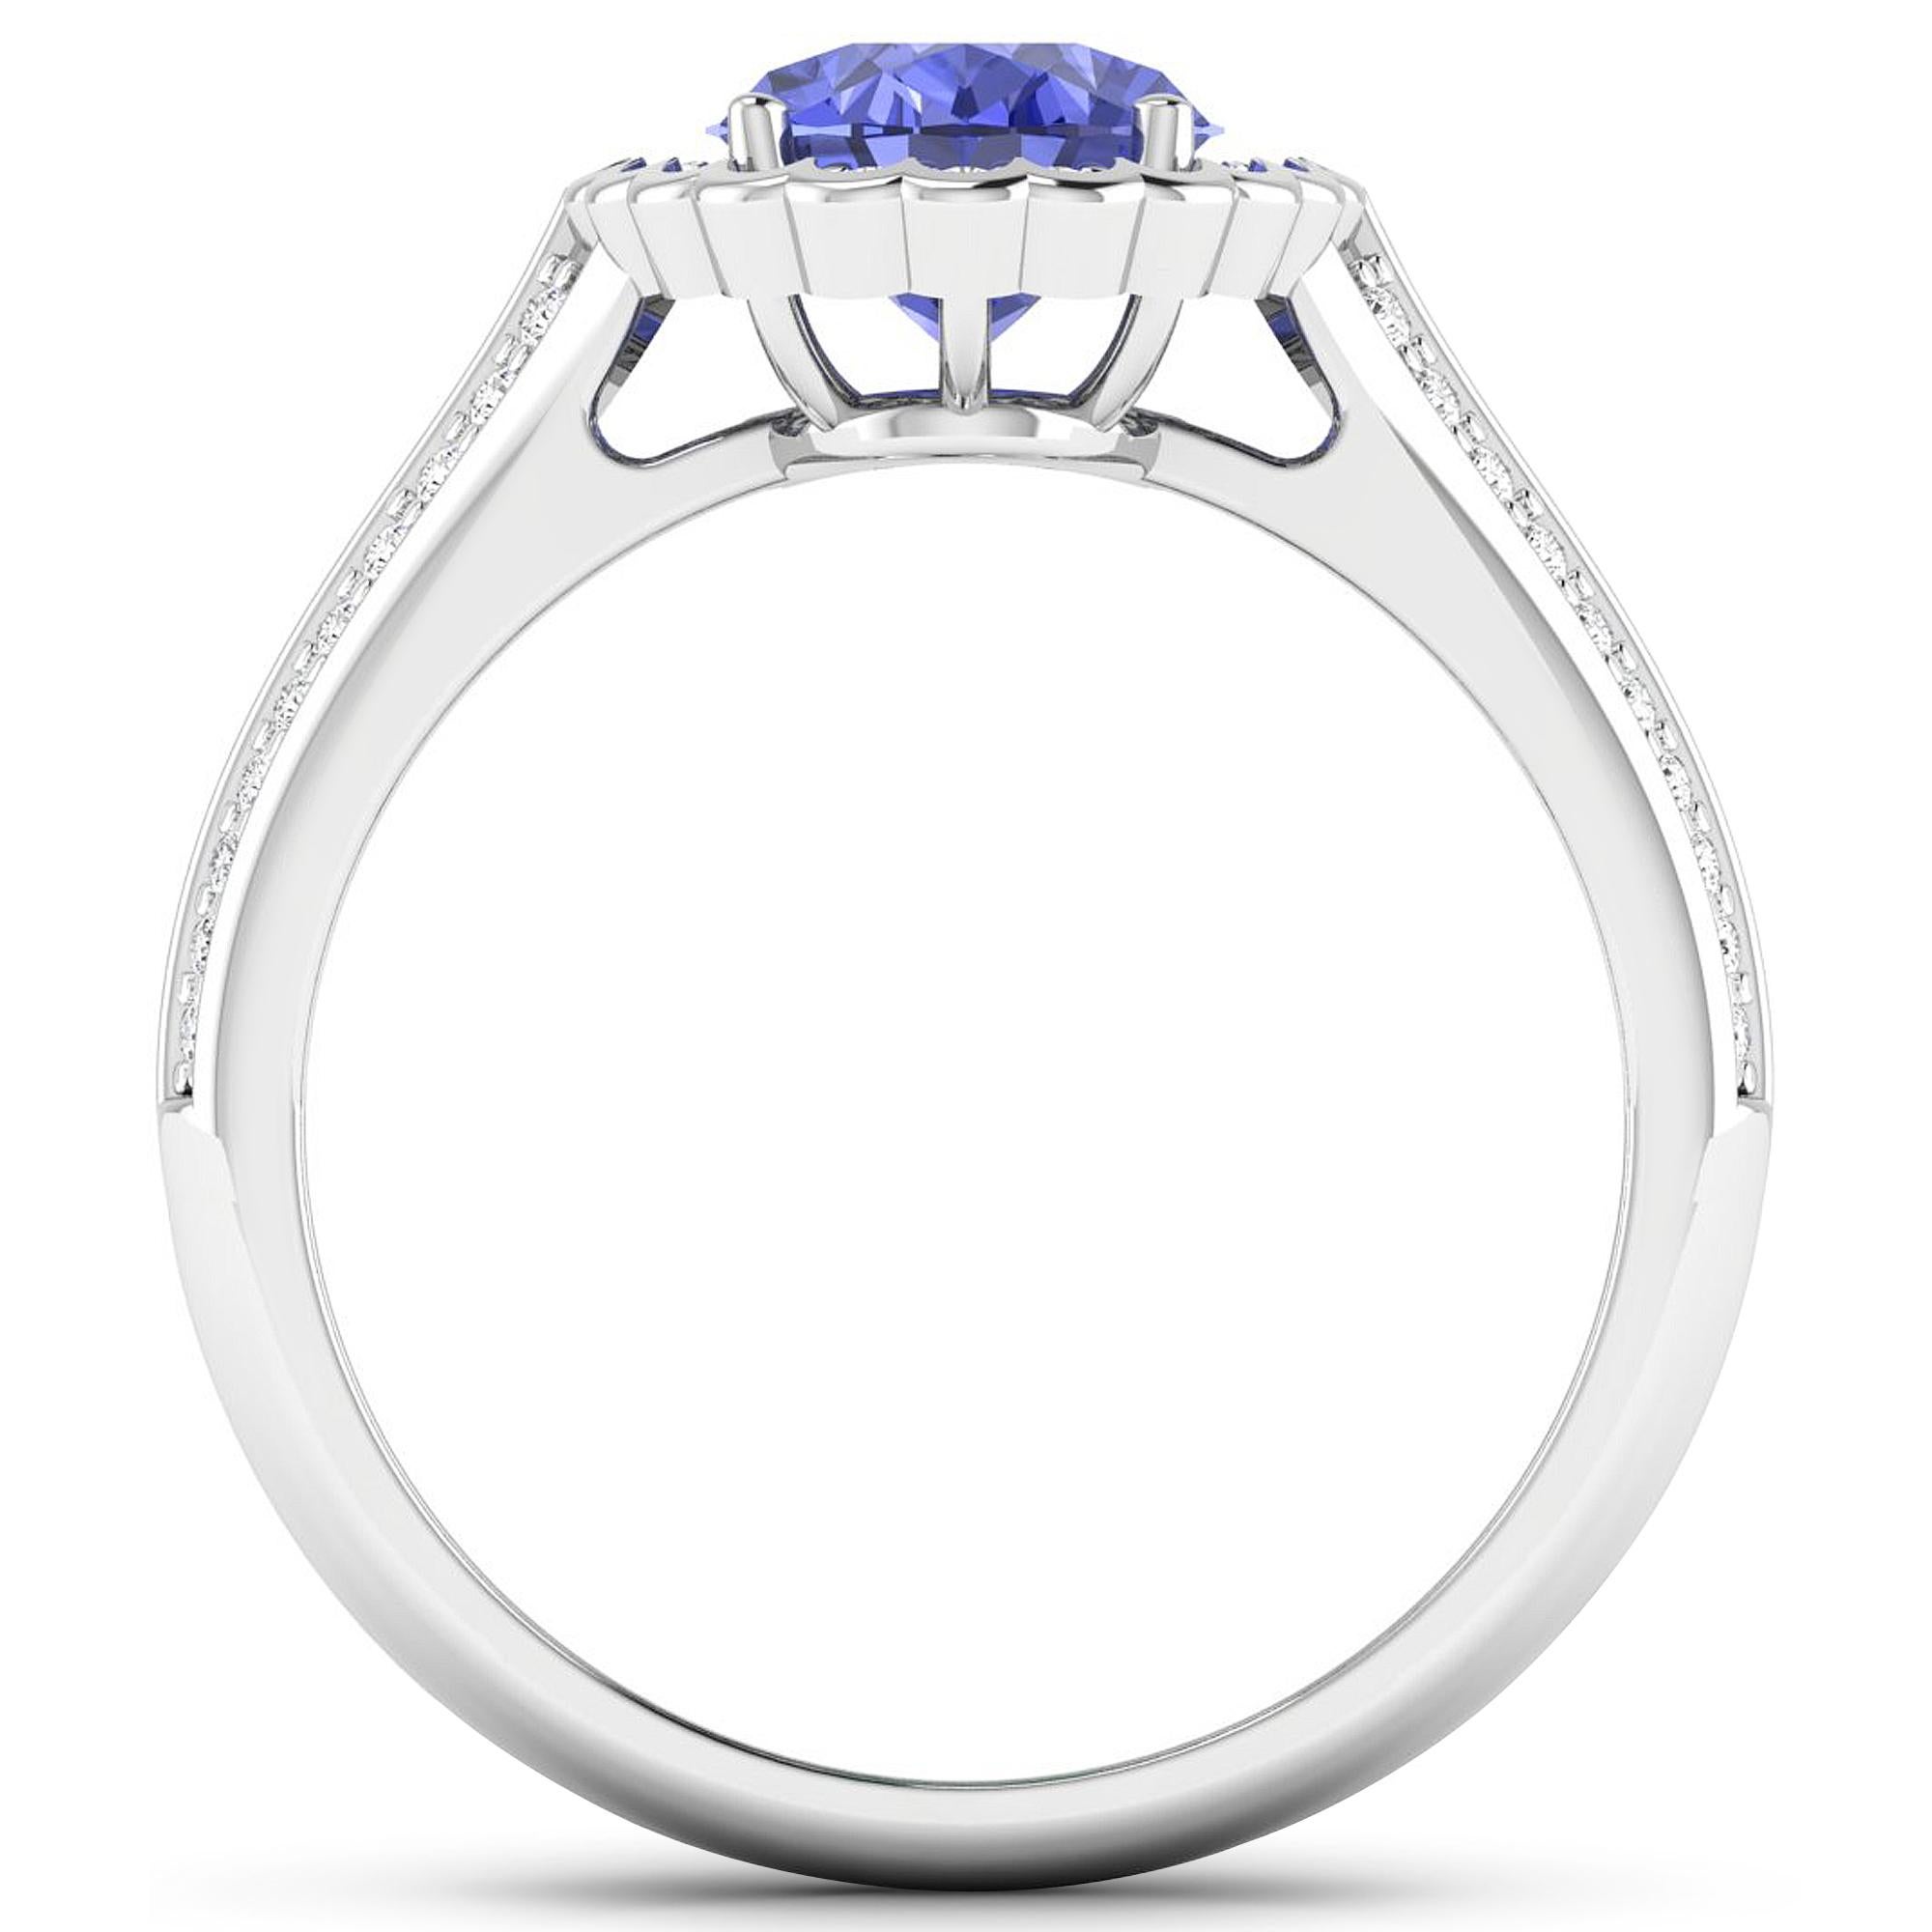 Tanzanite Gold Ring, 14Kt Gold Tanzanite & Diamond Engagement Ring, 2.02ctw.

Flaunt yourself with this 14K White Gold Tanzanite & White Diamond Engagement Ring. The setting is inlaid with 62 accented full-cut White Diamond round stones for a total